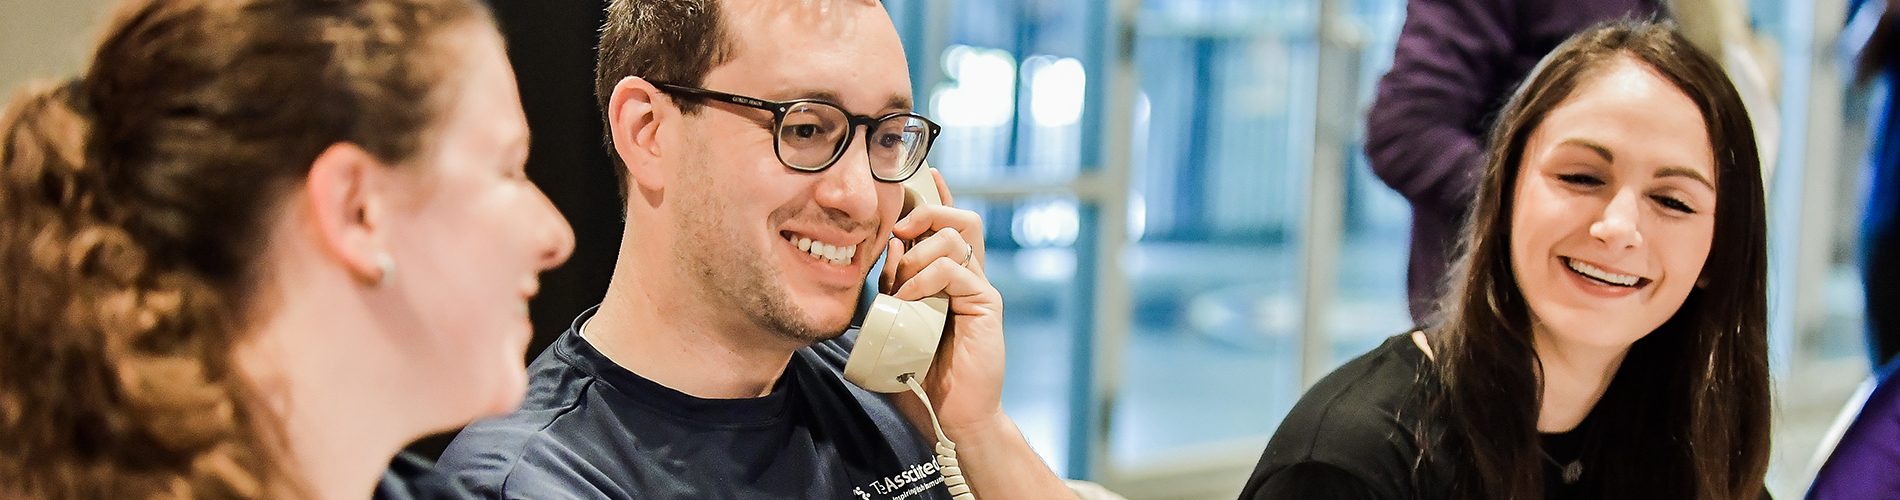 associated employees smiling while talking on telephone